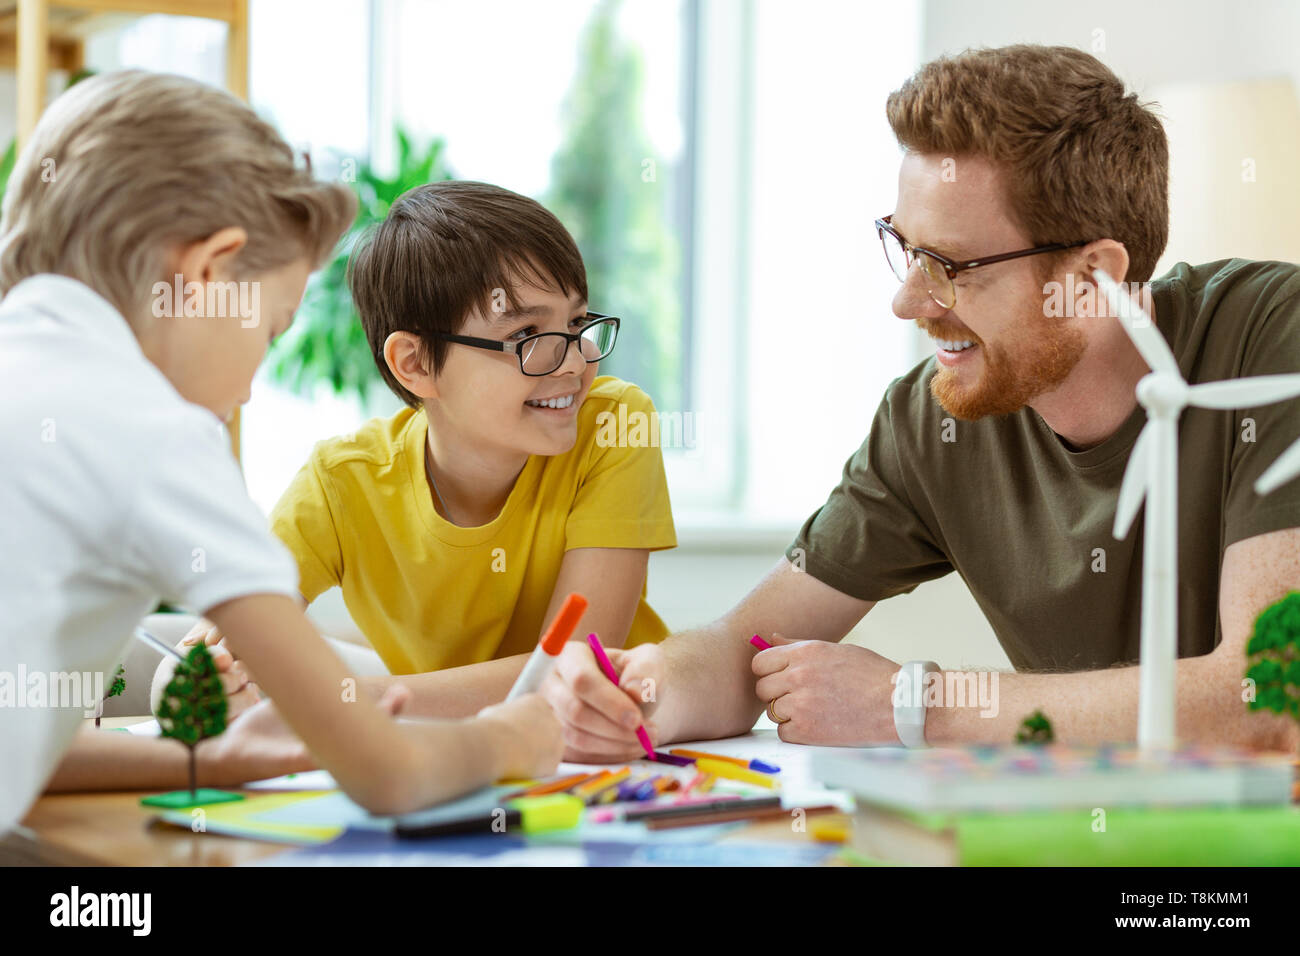 Laughing short-haired man in clear glasses helping little boys Stock Photo